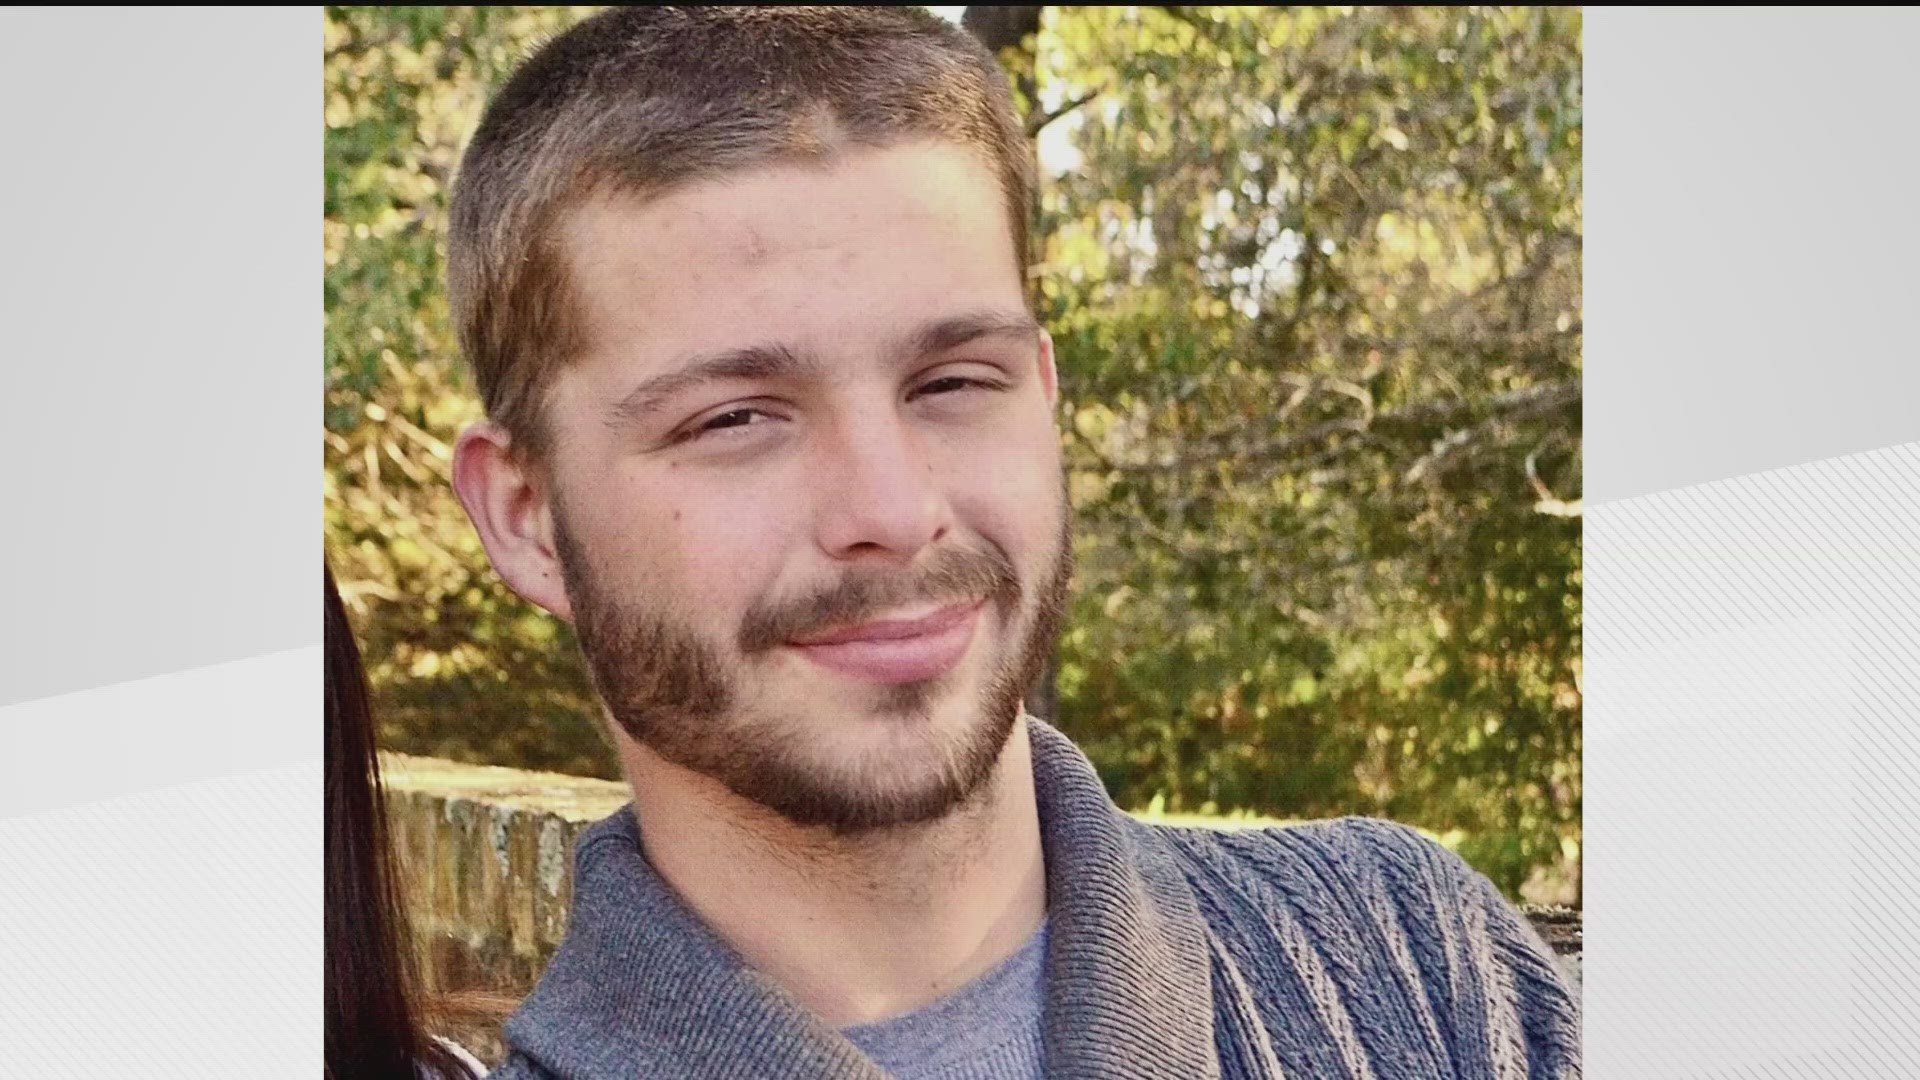 Ryan Archer, 26, of Griffin, died on Dec. 13 just hours after his father said he'd been transferred to Coastal State Prison in Garden City.